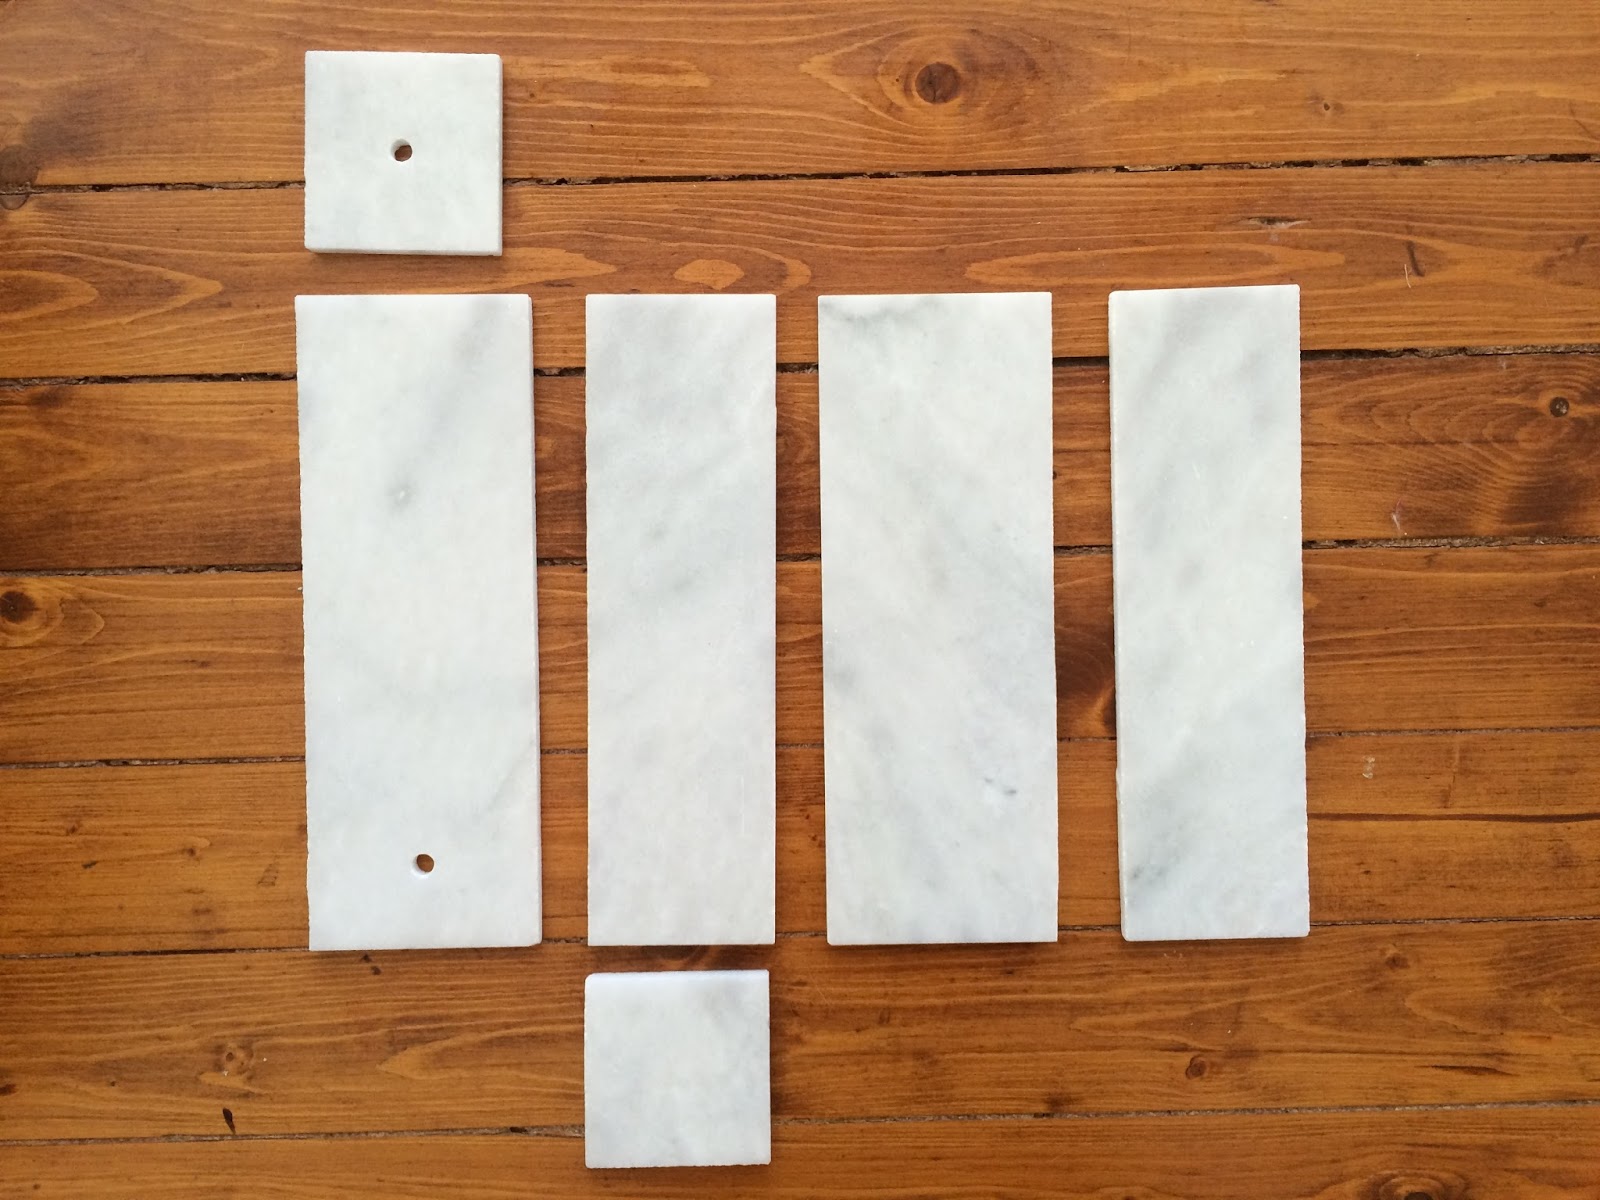 diy steps with marble pieces for the lamp base construction